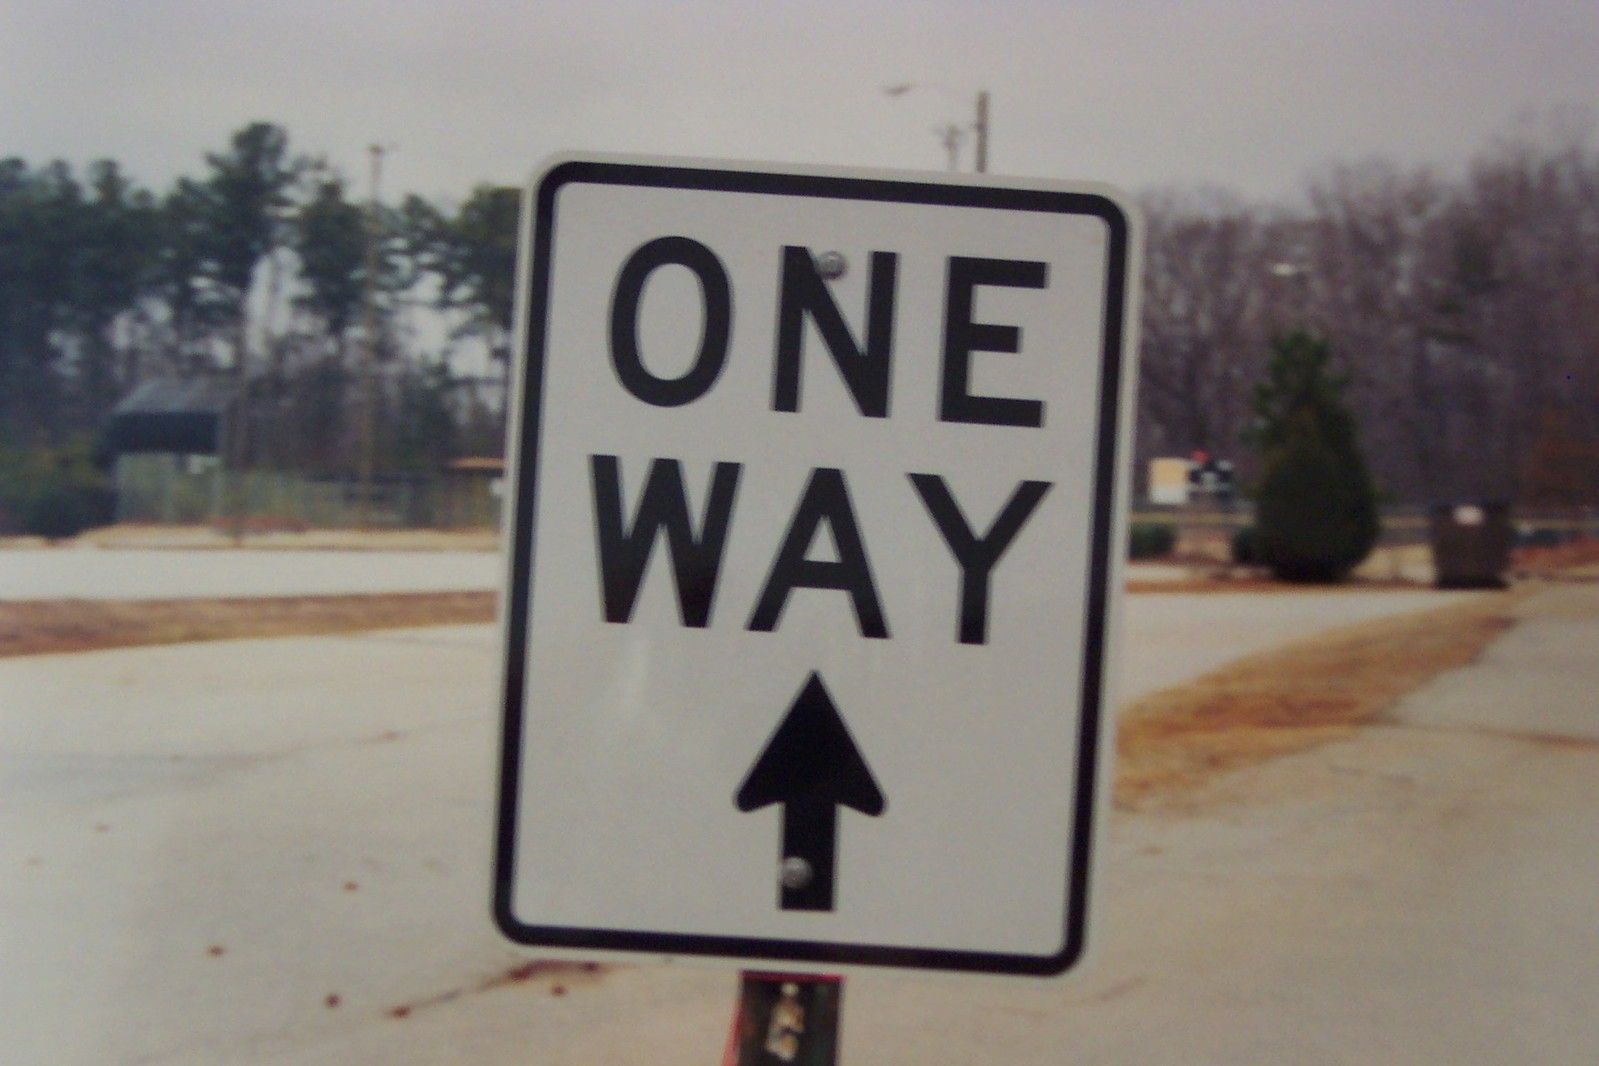 (Go Your Own Way — The Lack of Transparency in Fighting Covid-19)